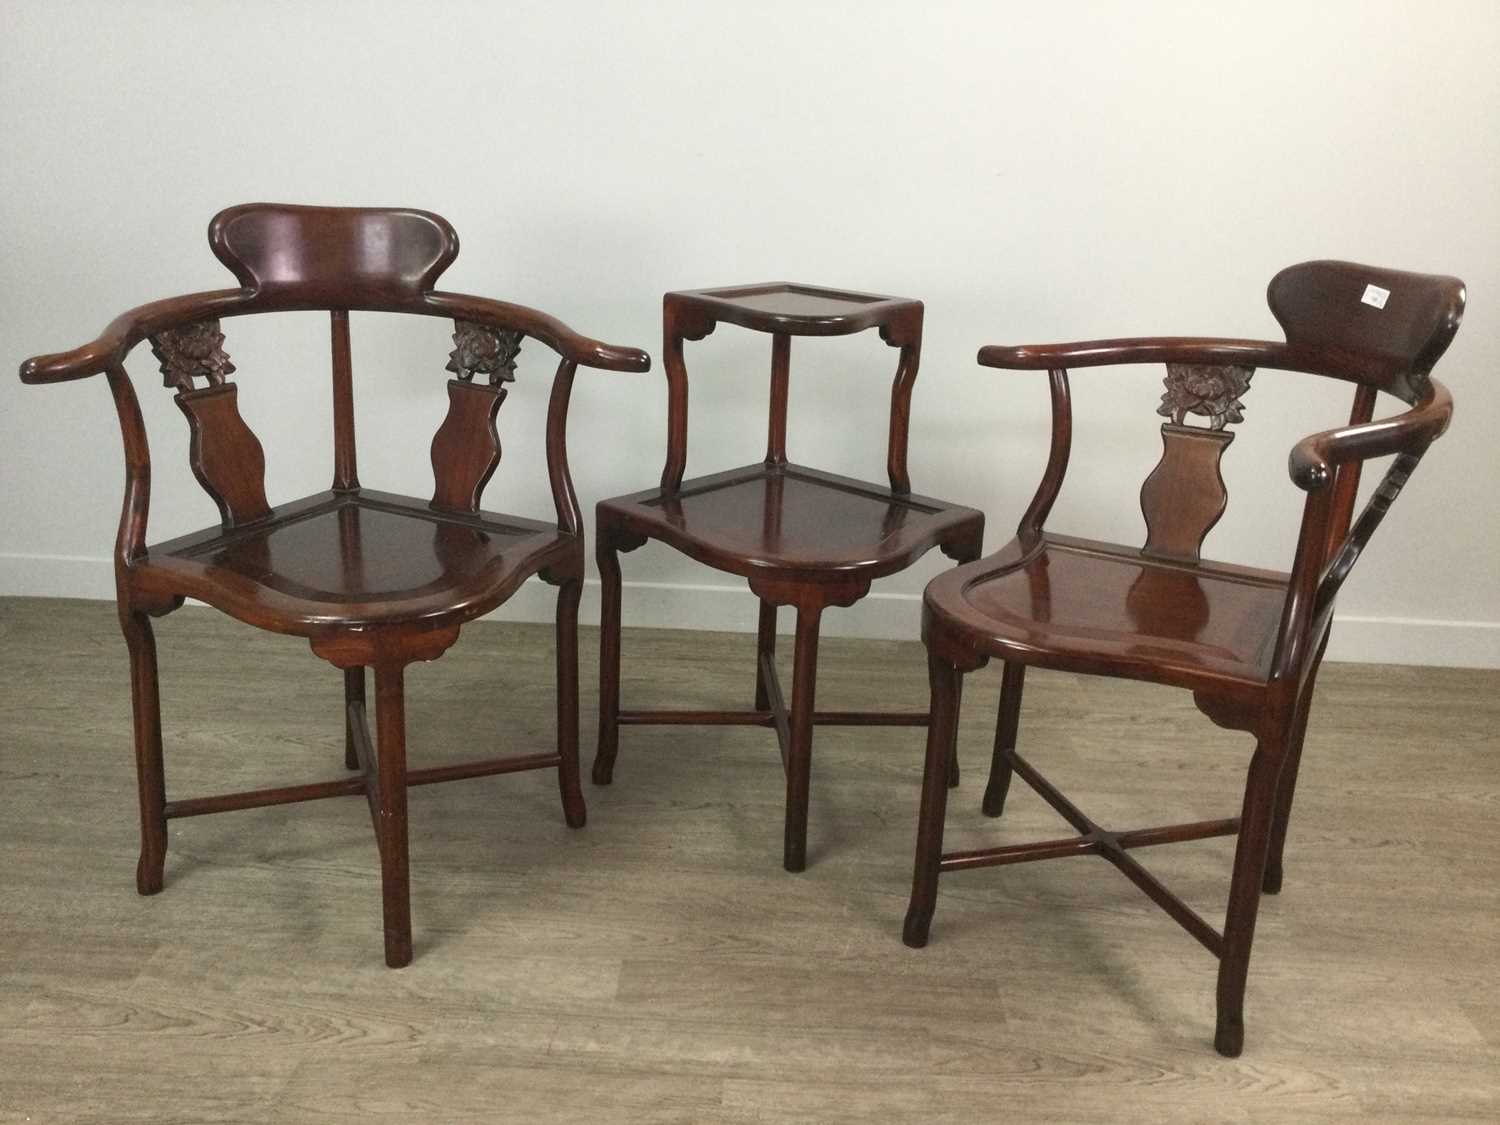 Lot 125 - A PAIR OF CHINESE HARDWOOD CORNER CHAIRS AND A TWO TIER TABLE